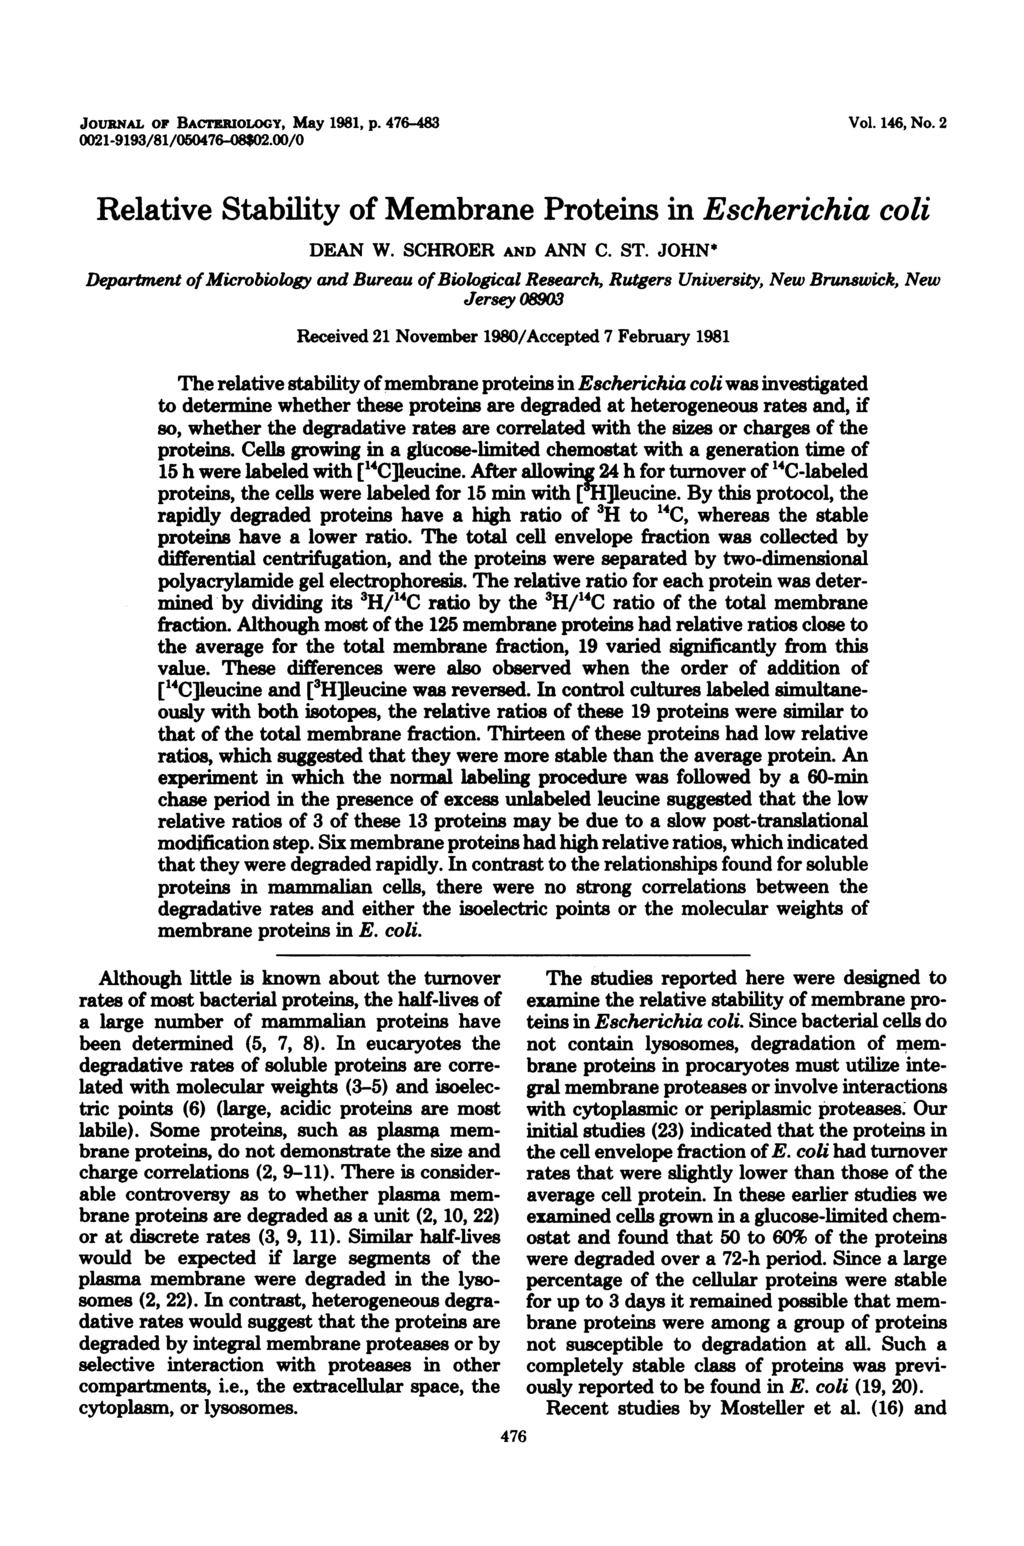 JouRNAL OF BACTEROLOGY, May 1981, p. 476-483 0021-9193/81/050476-08$02.00/0 Vol. 146, No. 2 Relative Stability of Membrane Proteins in Escherichia coli DEAN W. SCHROER AND ANN C. ST.